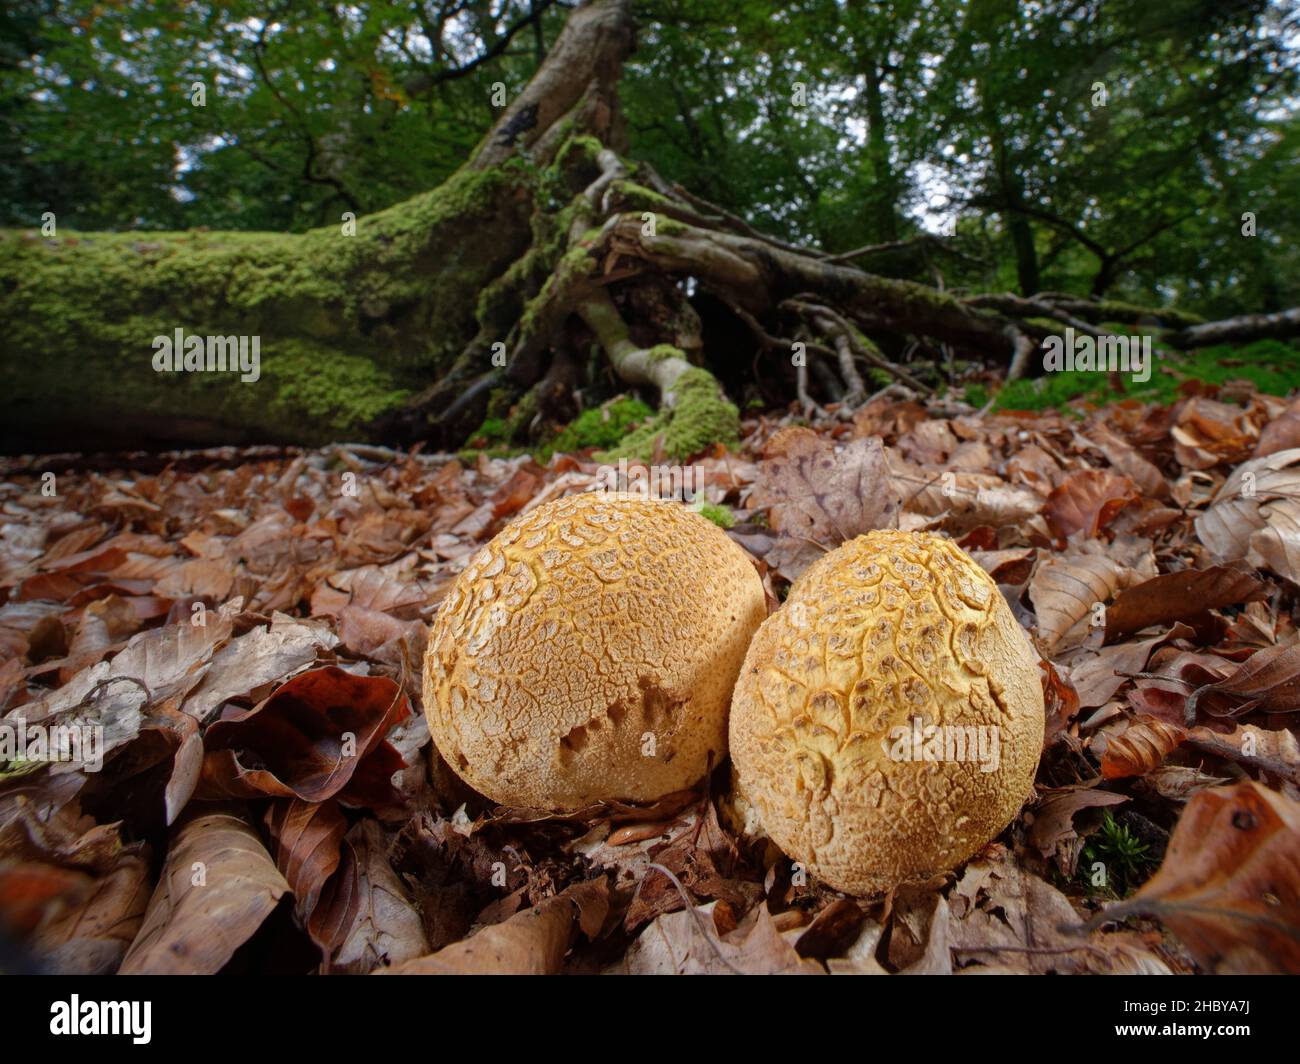 Common earthball / Pigskin poison puffballs (Scleroderma citrinum) on woodland floor leaf litter in ancient Beech woodland, New Forest, Hampshire, UK Stock Photo